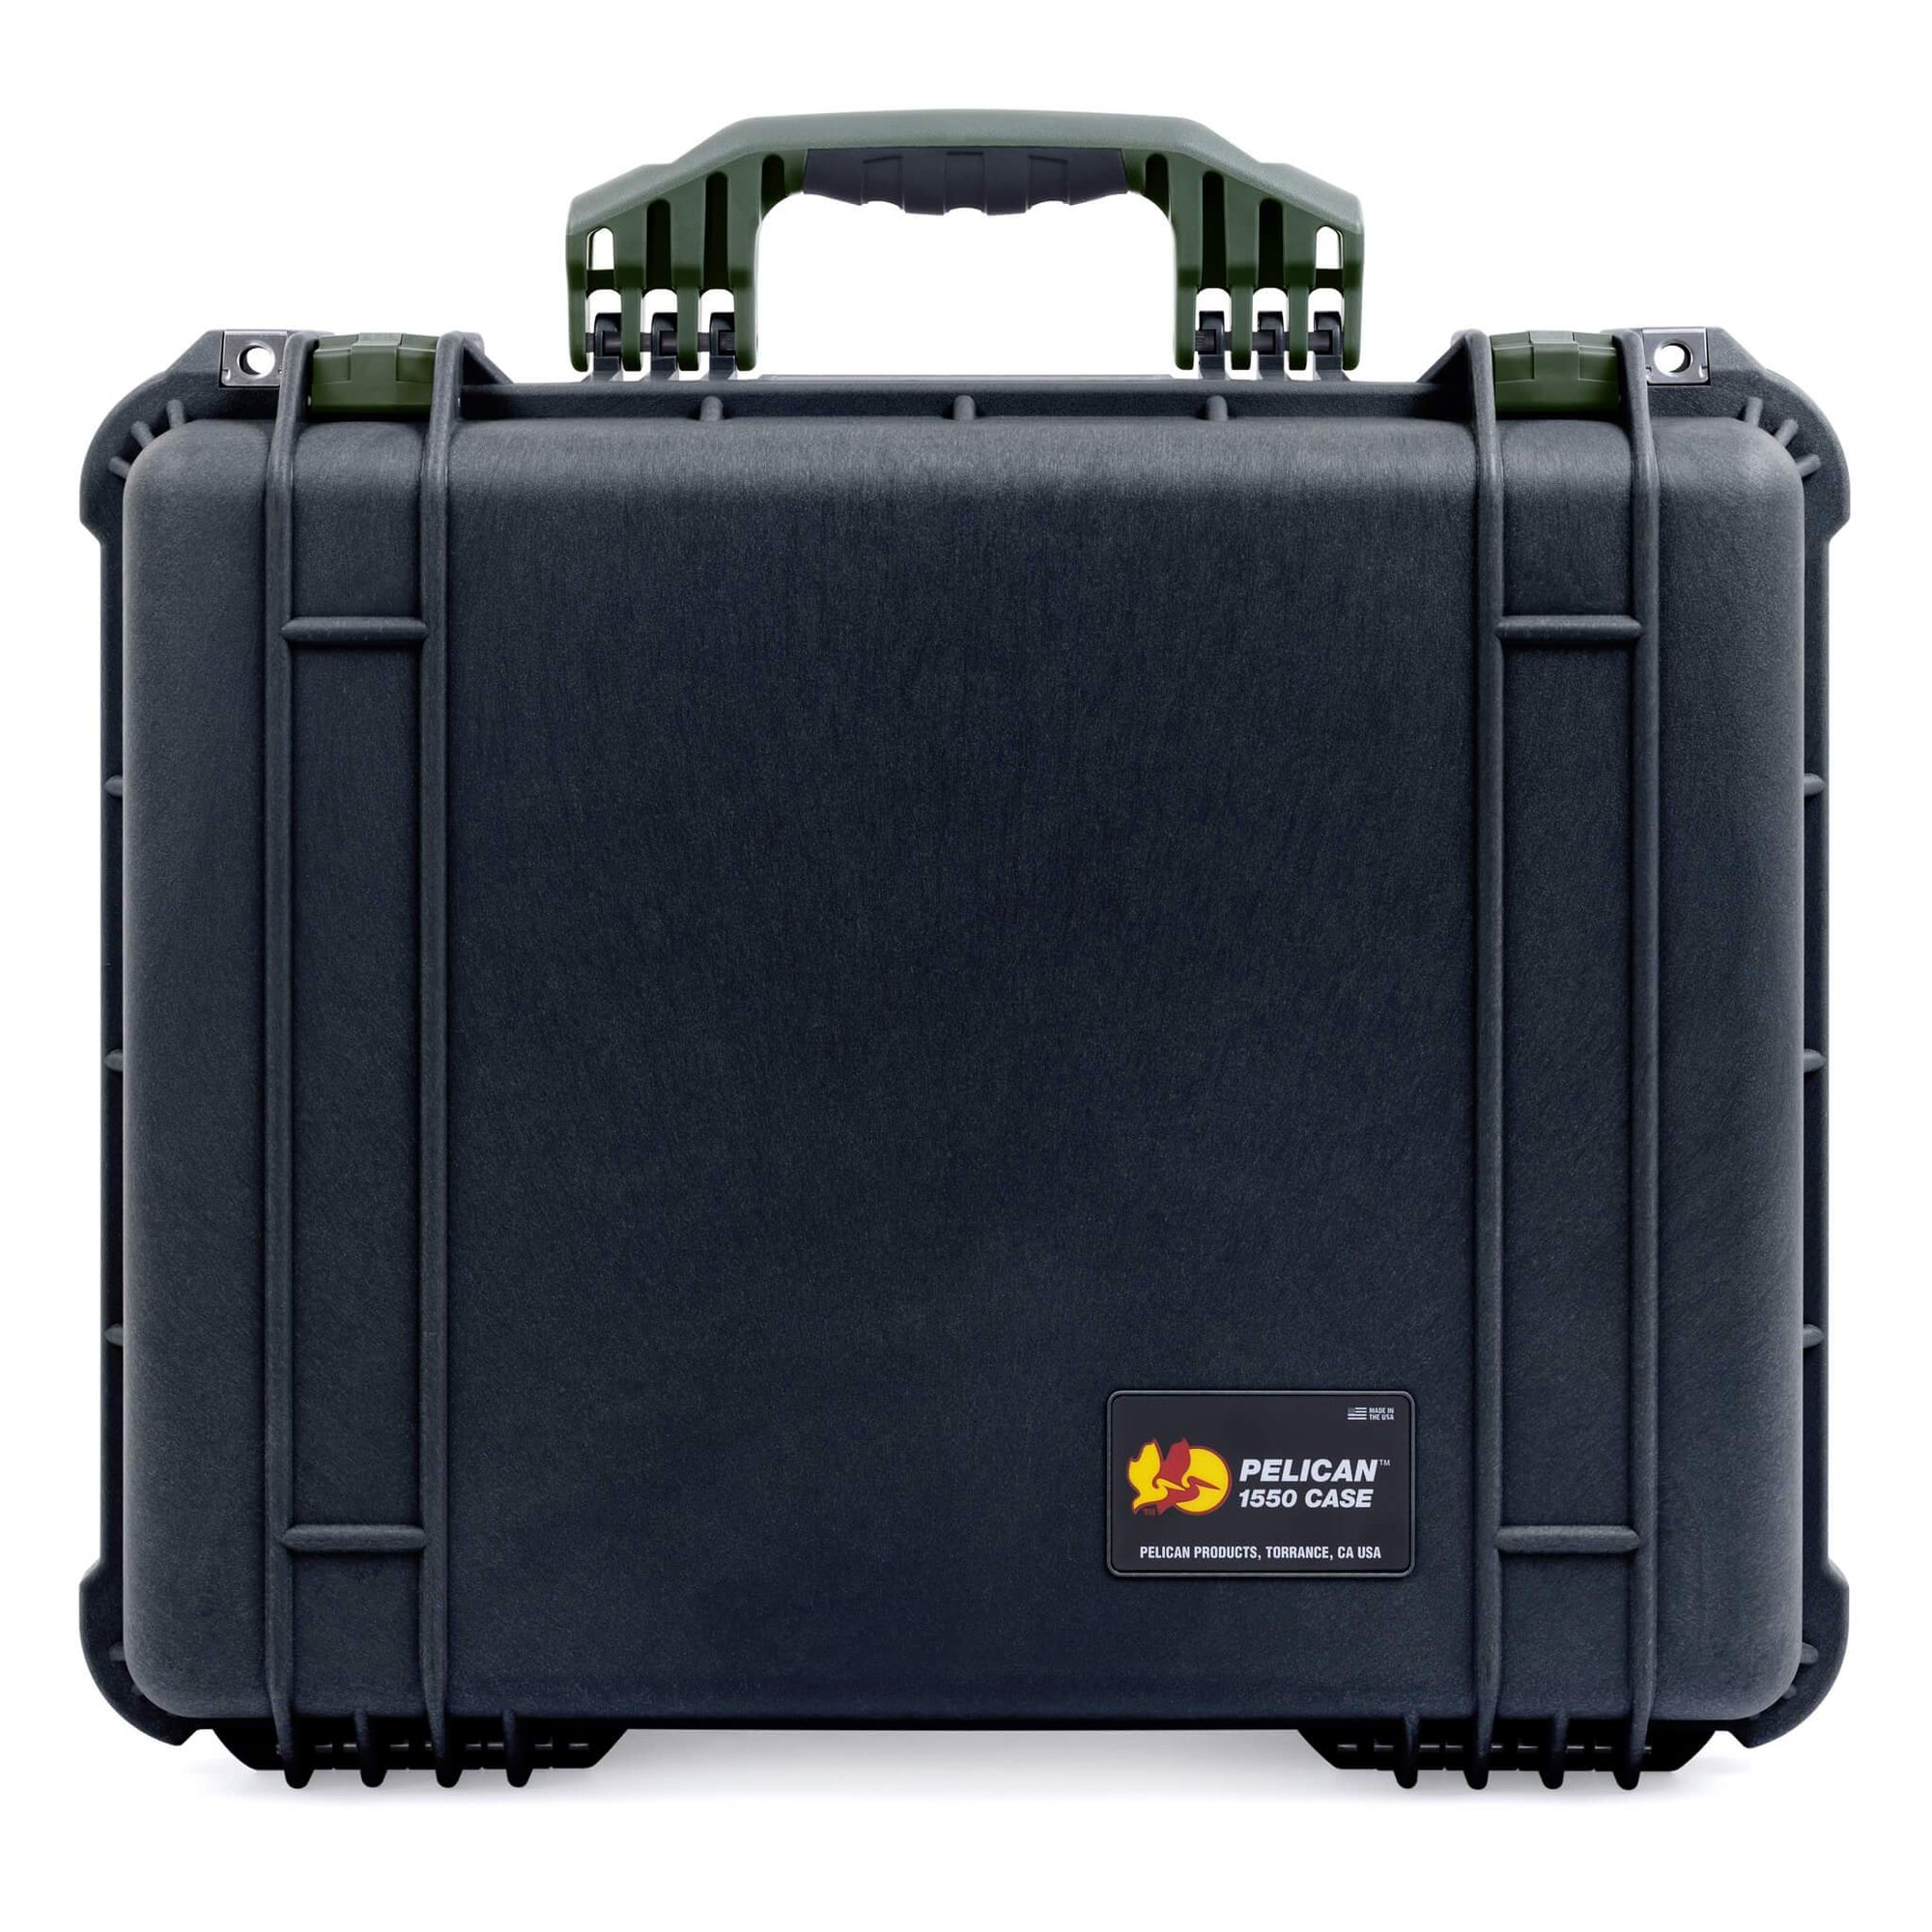 Pelican 1550 Case, Black with OD Green Handle & Latches ColorCase 